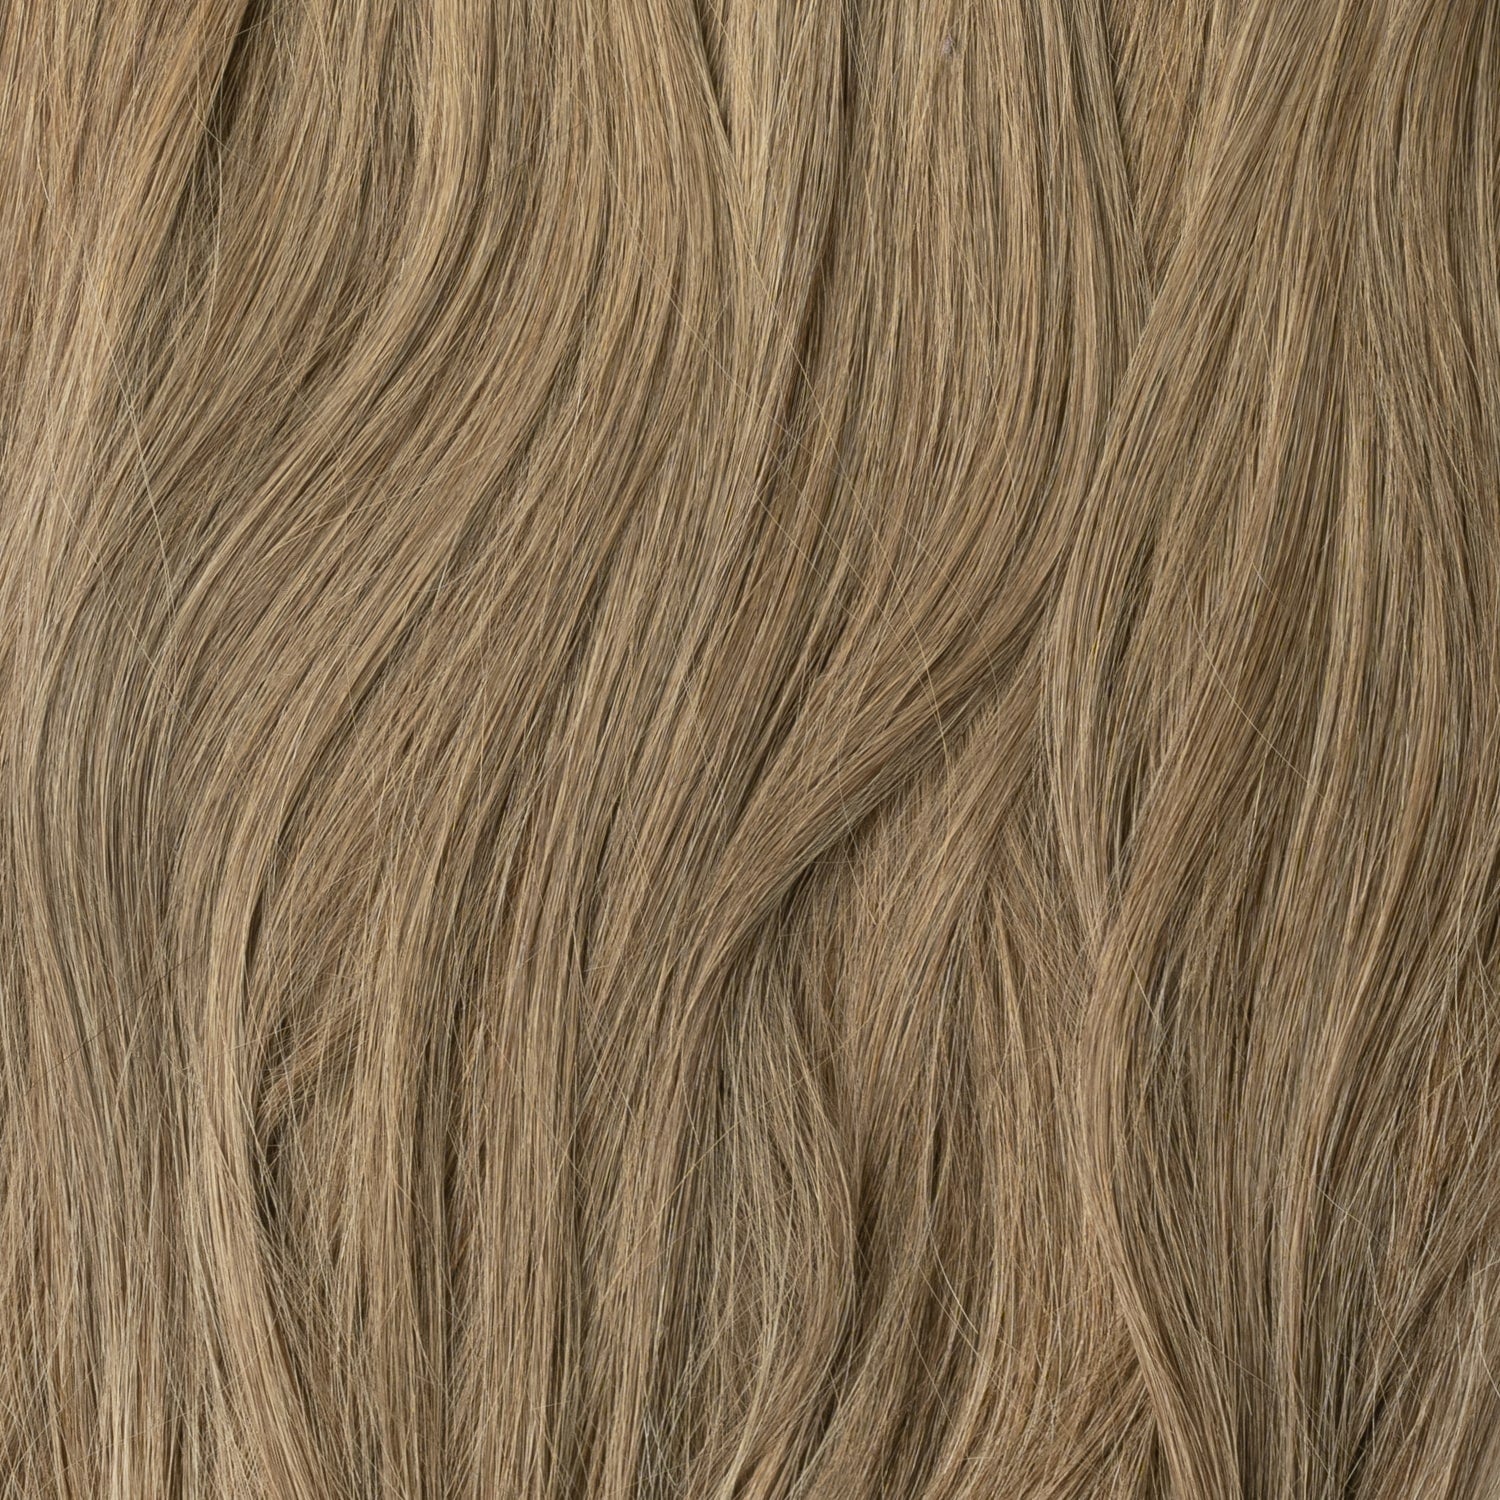 Tape in Extensions - Light Ash Brown 5B